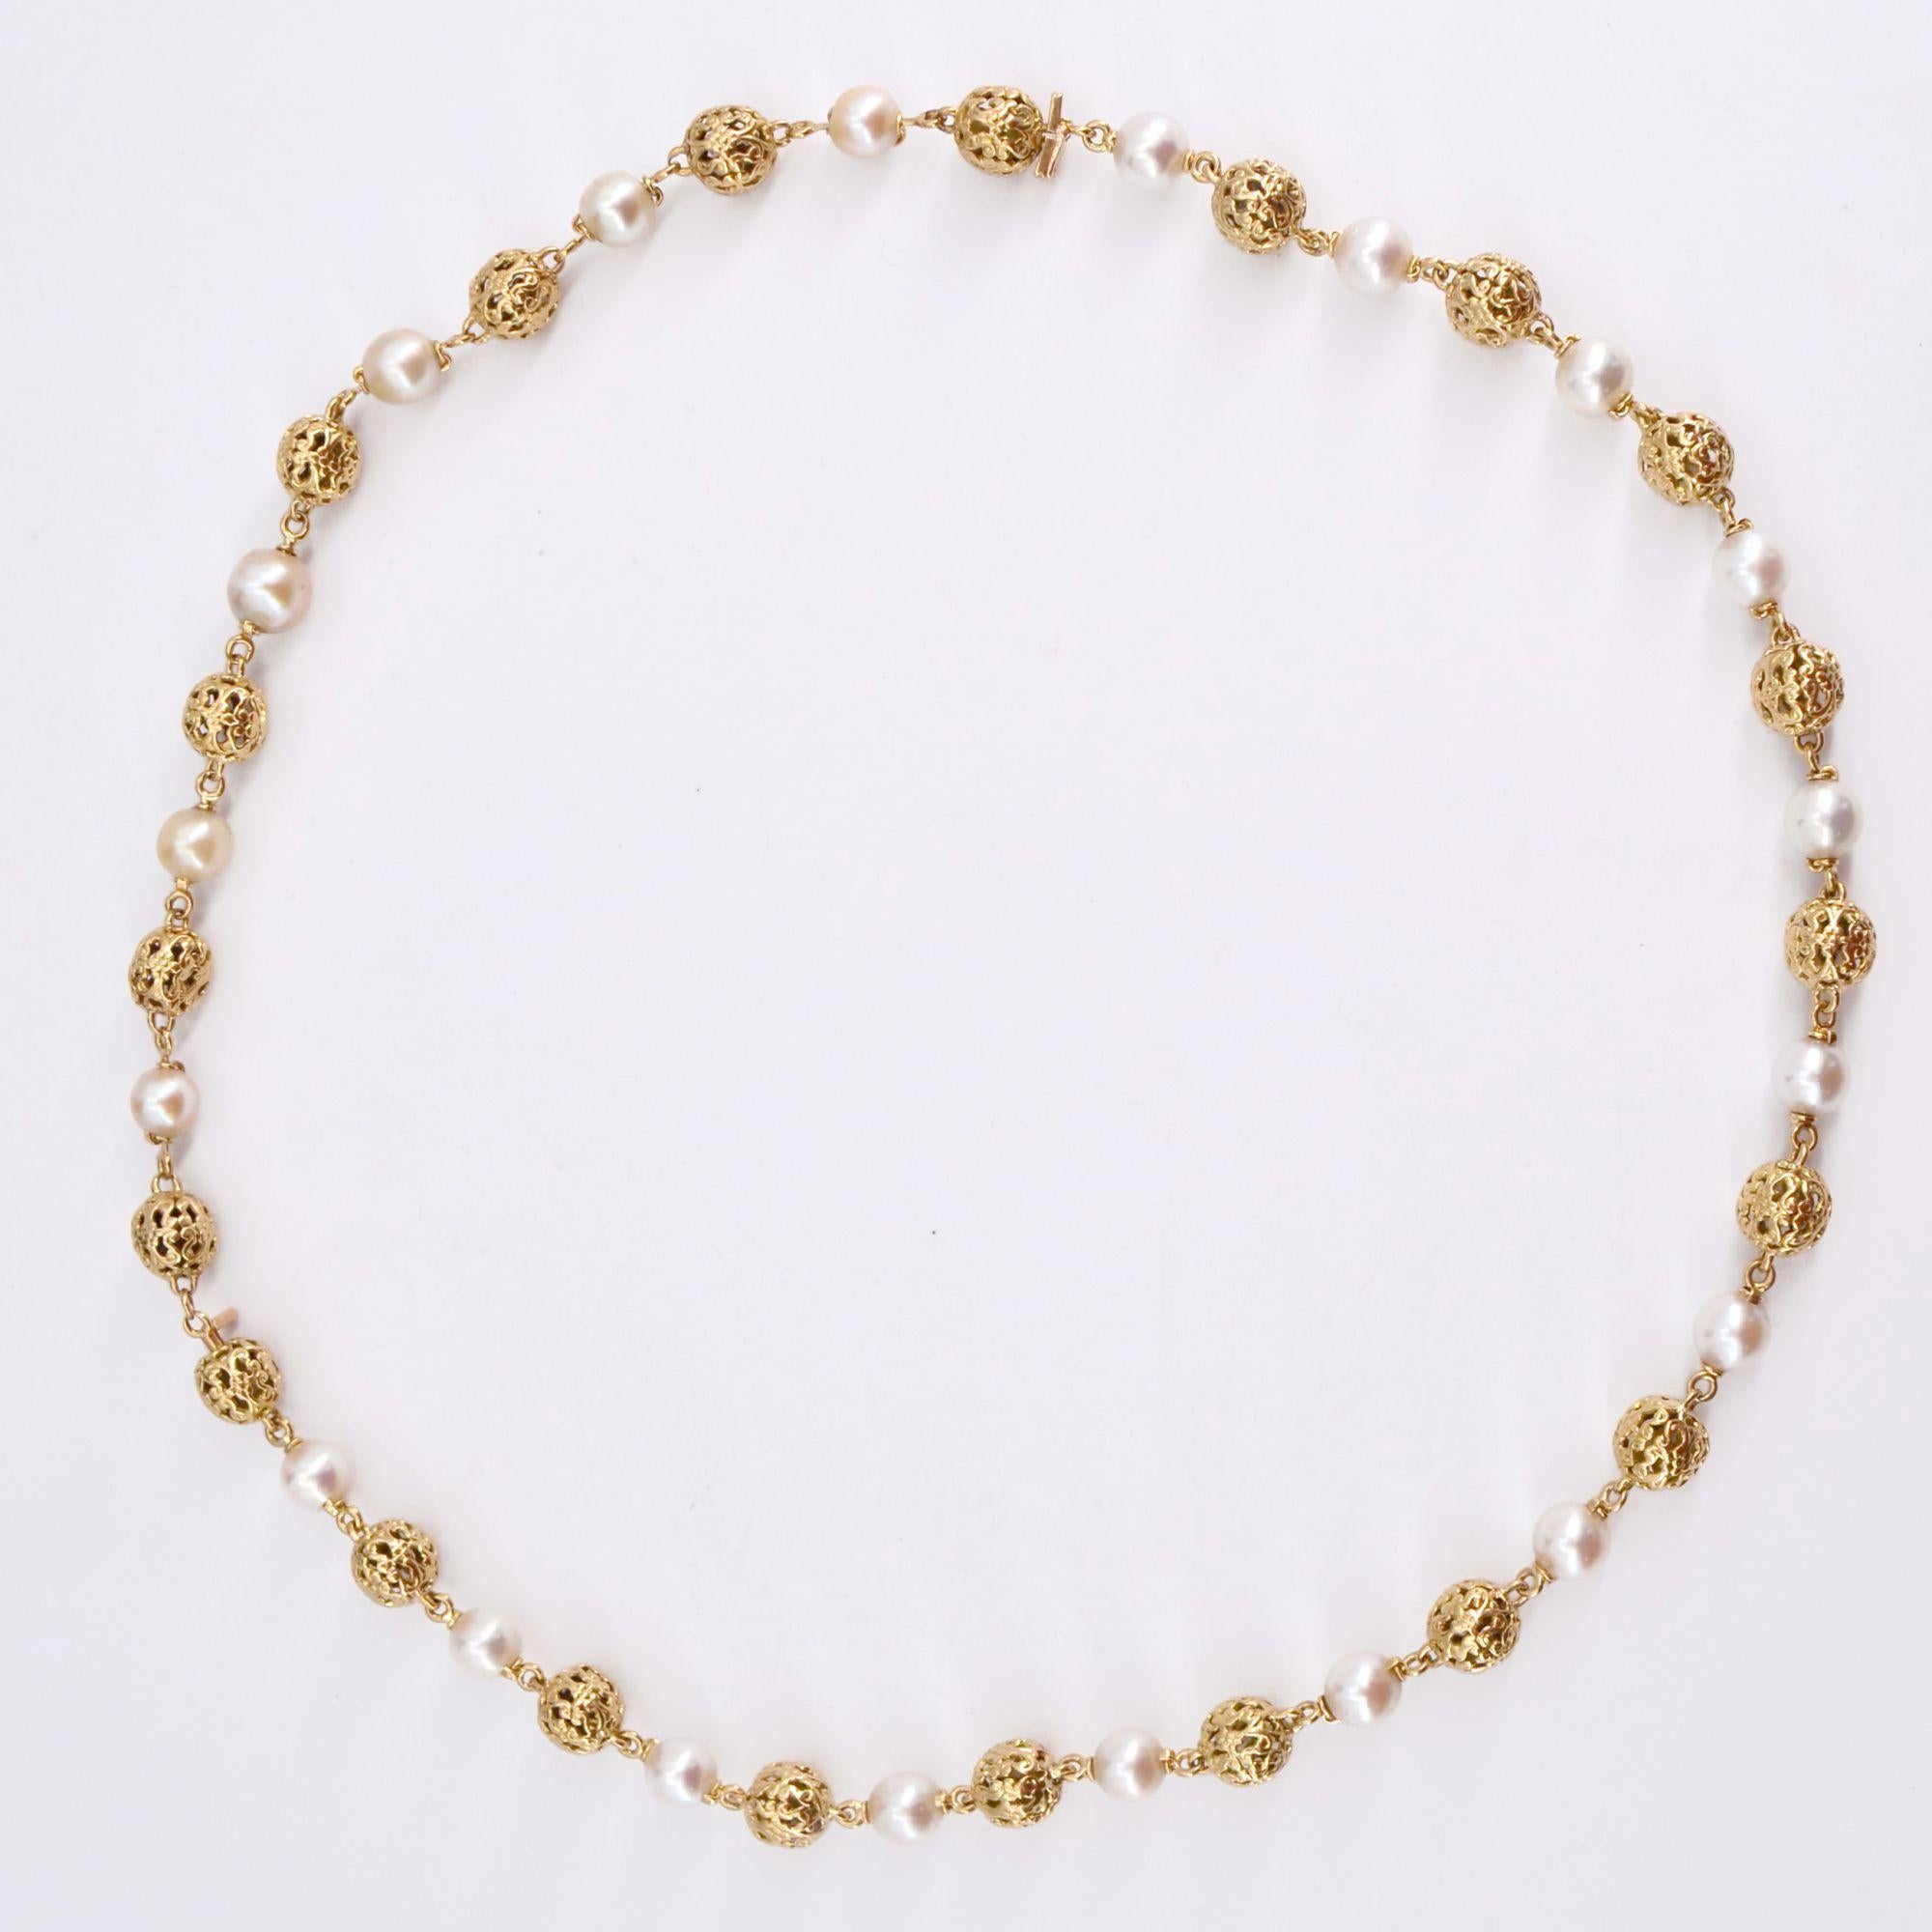 French 1960s 18 Karat Yellow Gold Cultured Pearls Convertible Necklace For Sale 7